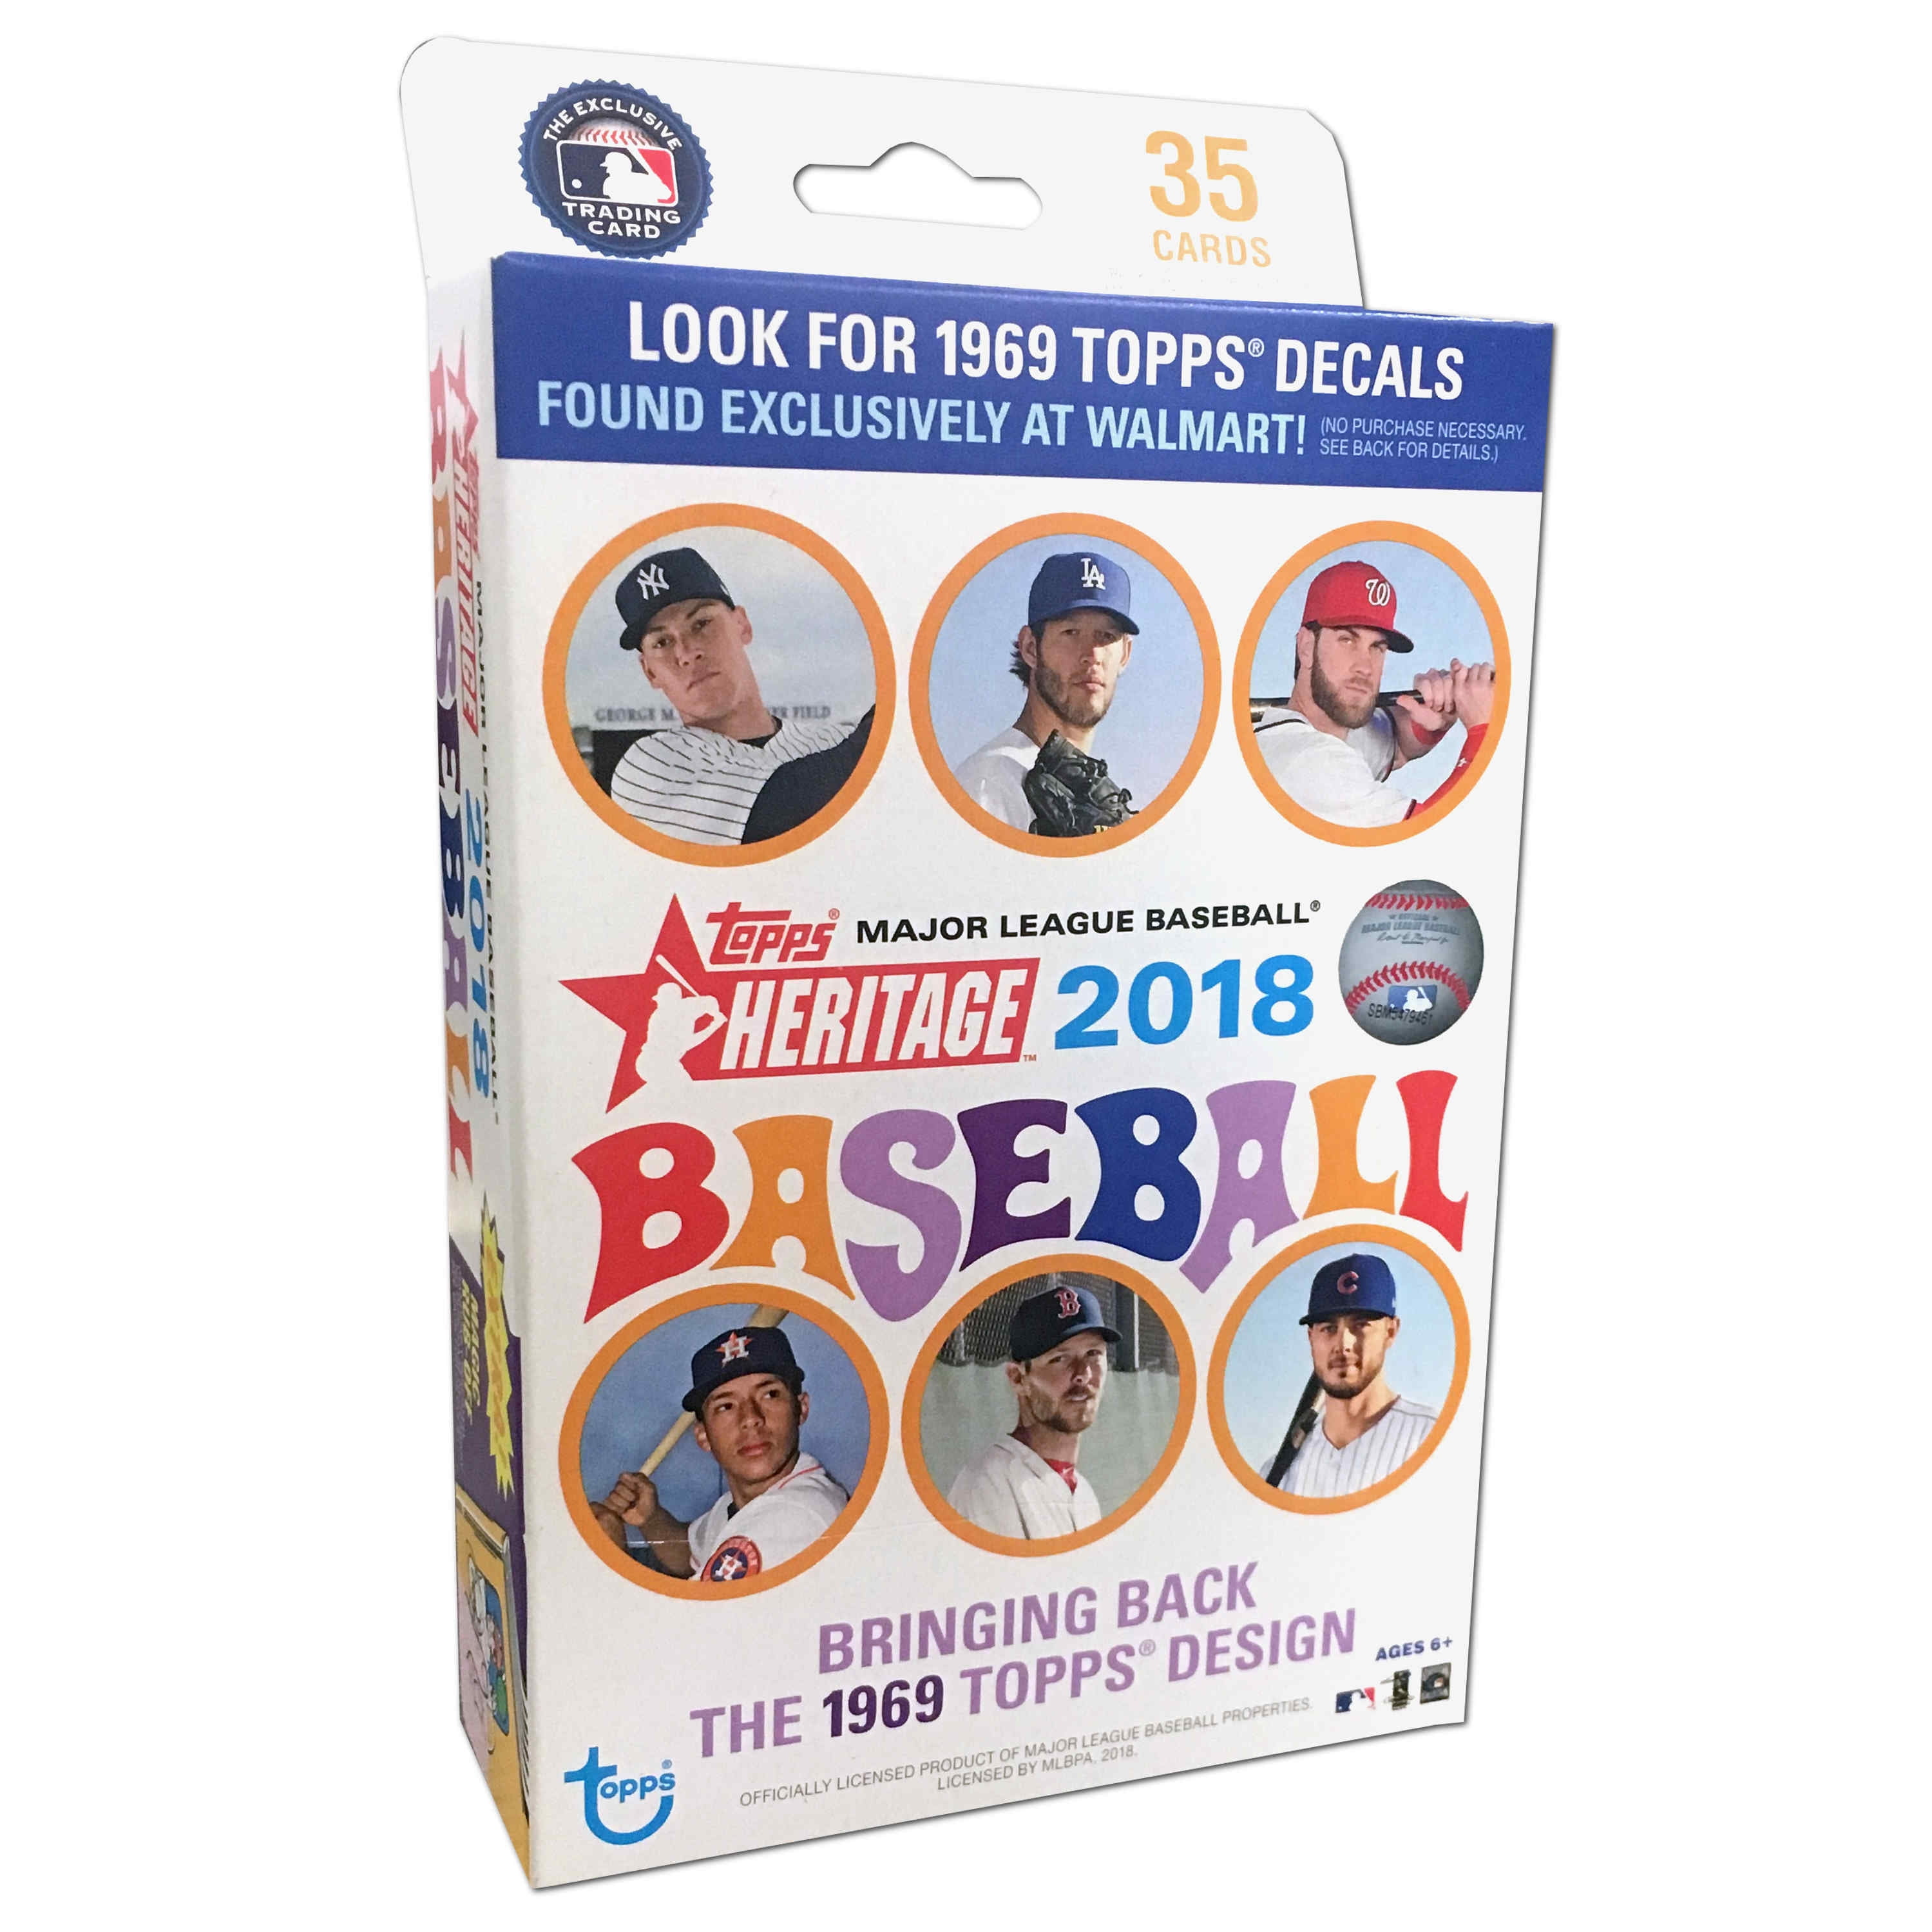 2018 Topps MLB Baseball Heritage Hanger Box Trading Cards | Featuring  Shohei Ohtani's Premiere| 1969 Design | Exclusive Decals only found in this  box - Walmart.com